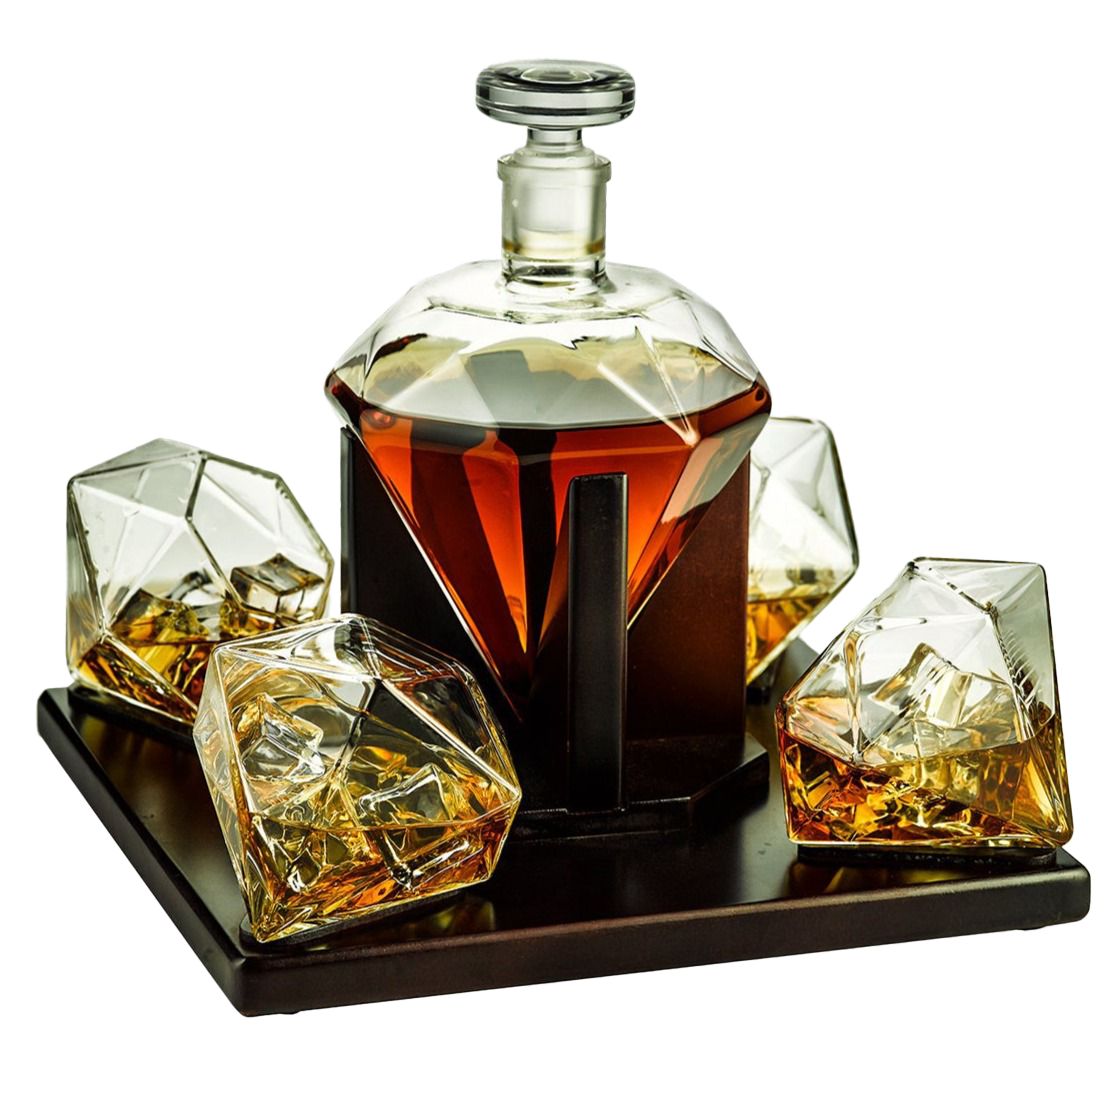 Liquor Lux Diamond Whiskey and Wine Decanter, Great Gift! 750ml With 4 Diamond Glasses and Beautiful Mahogany Wooden Holder Liquor, Scotch, Rum, Bourbon, Vodka, Tequila Decanter